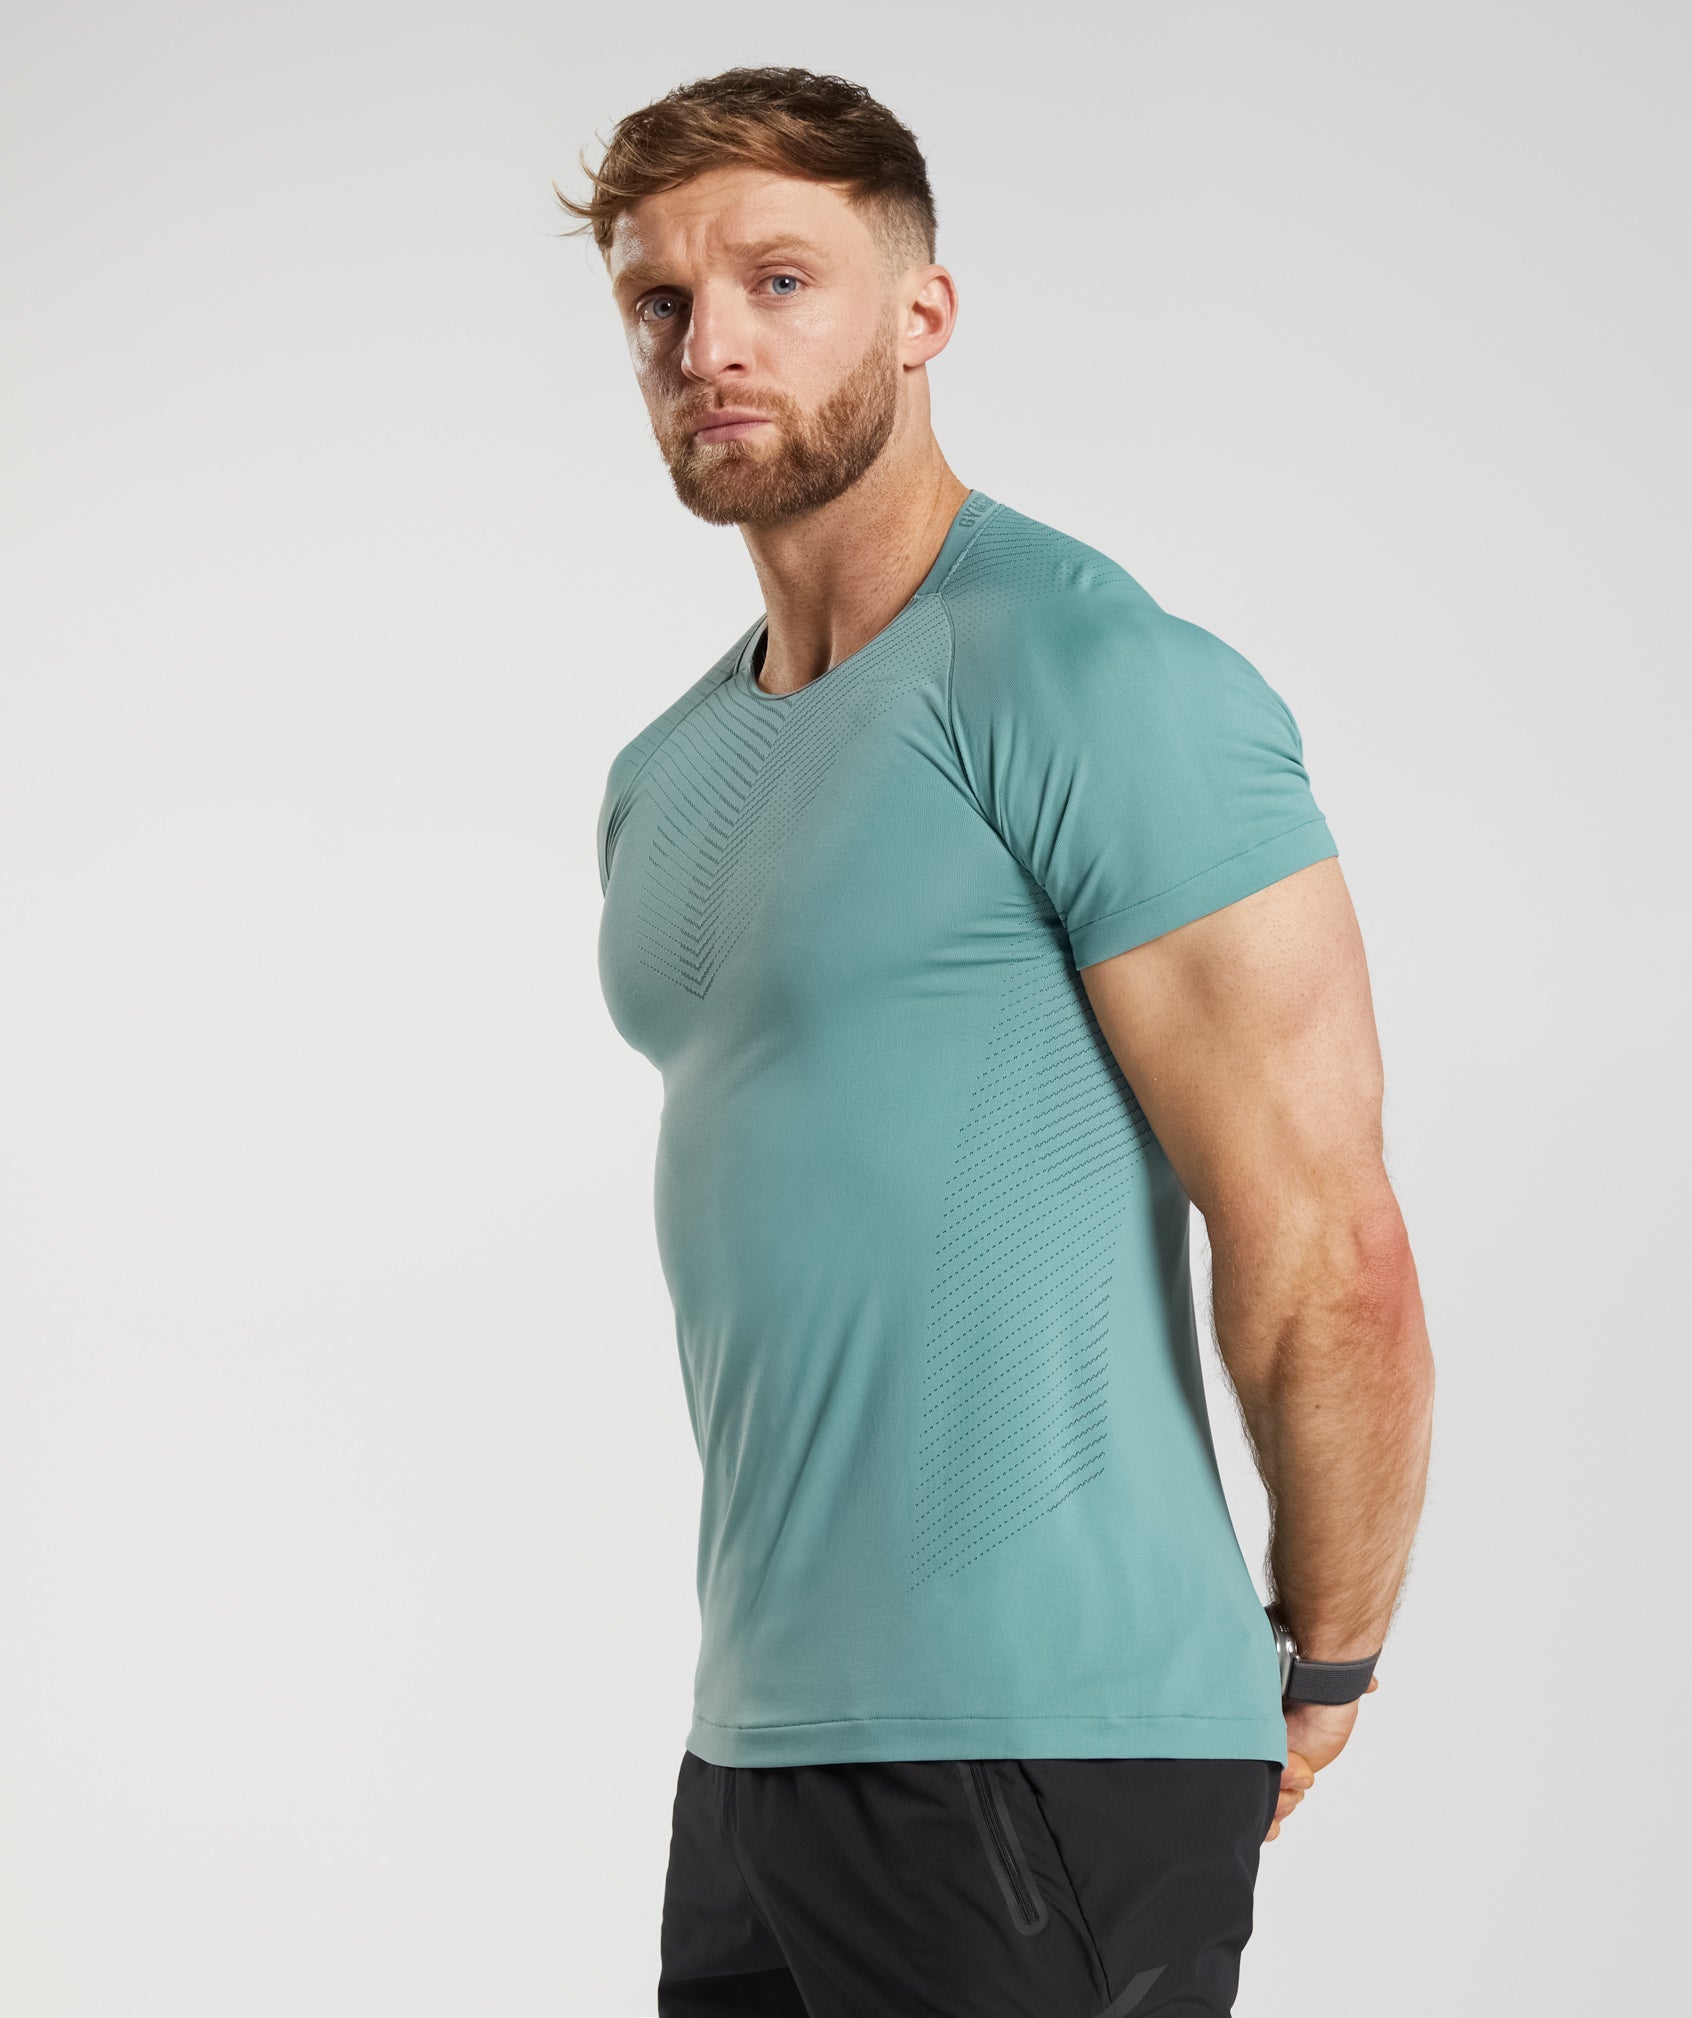 Apex Seamless T-Shirt in Ink Teal/Silhouette Grey - view 3